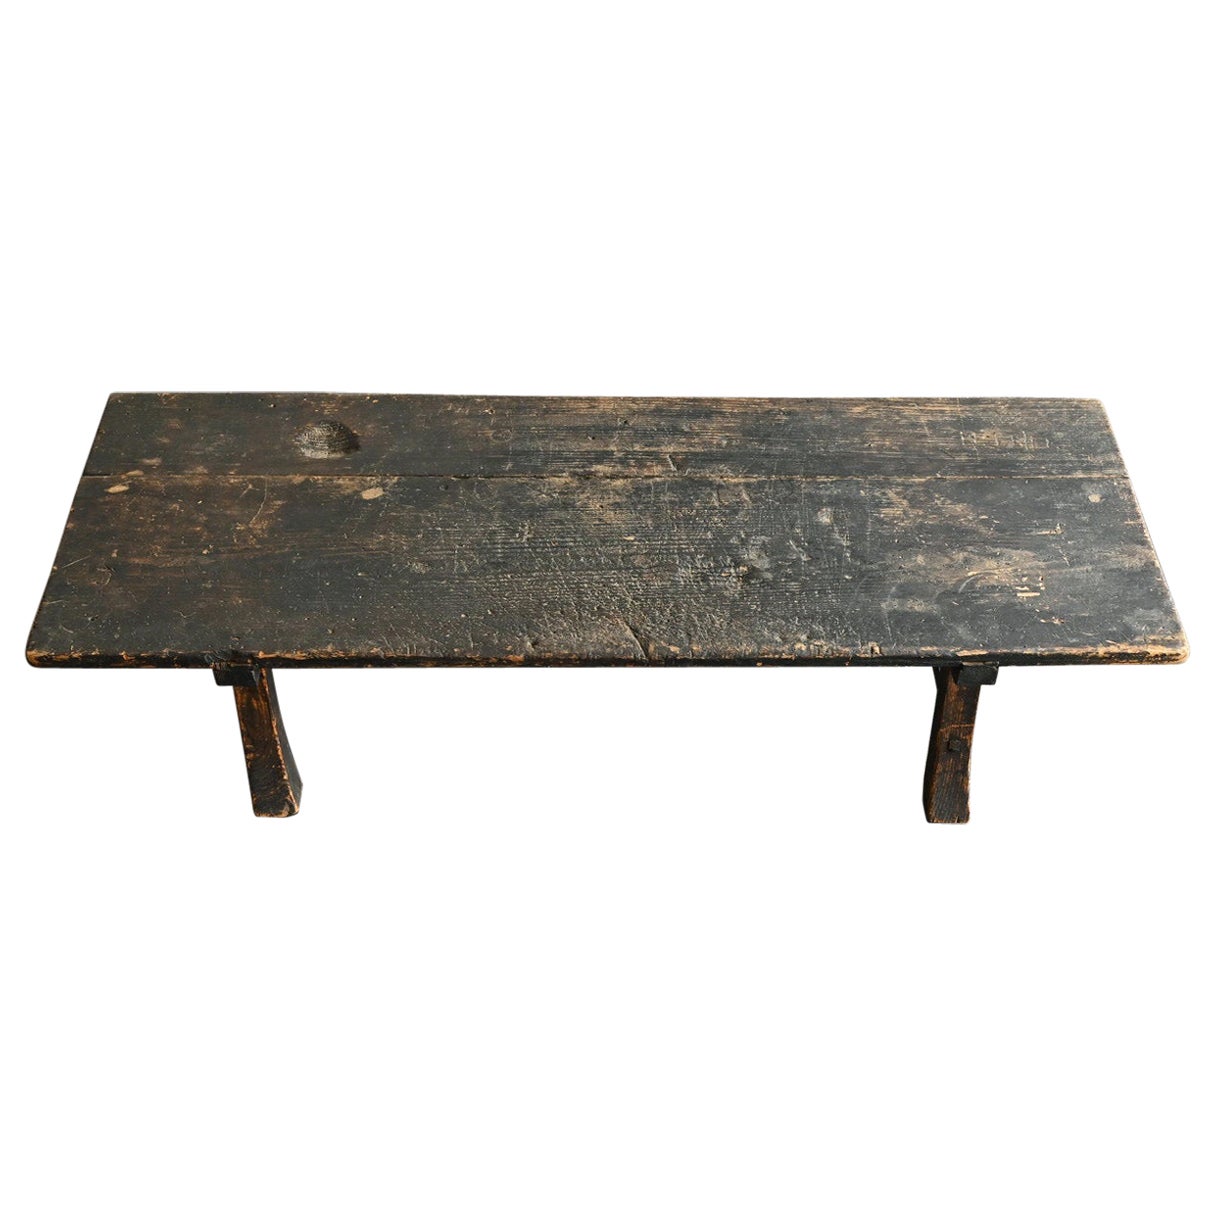 Japanese old wooden low table/wabisabi coffee table/1850-1920